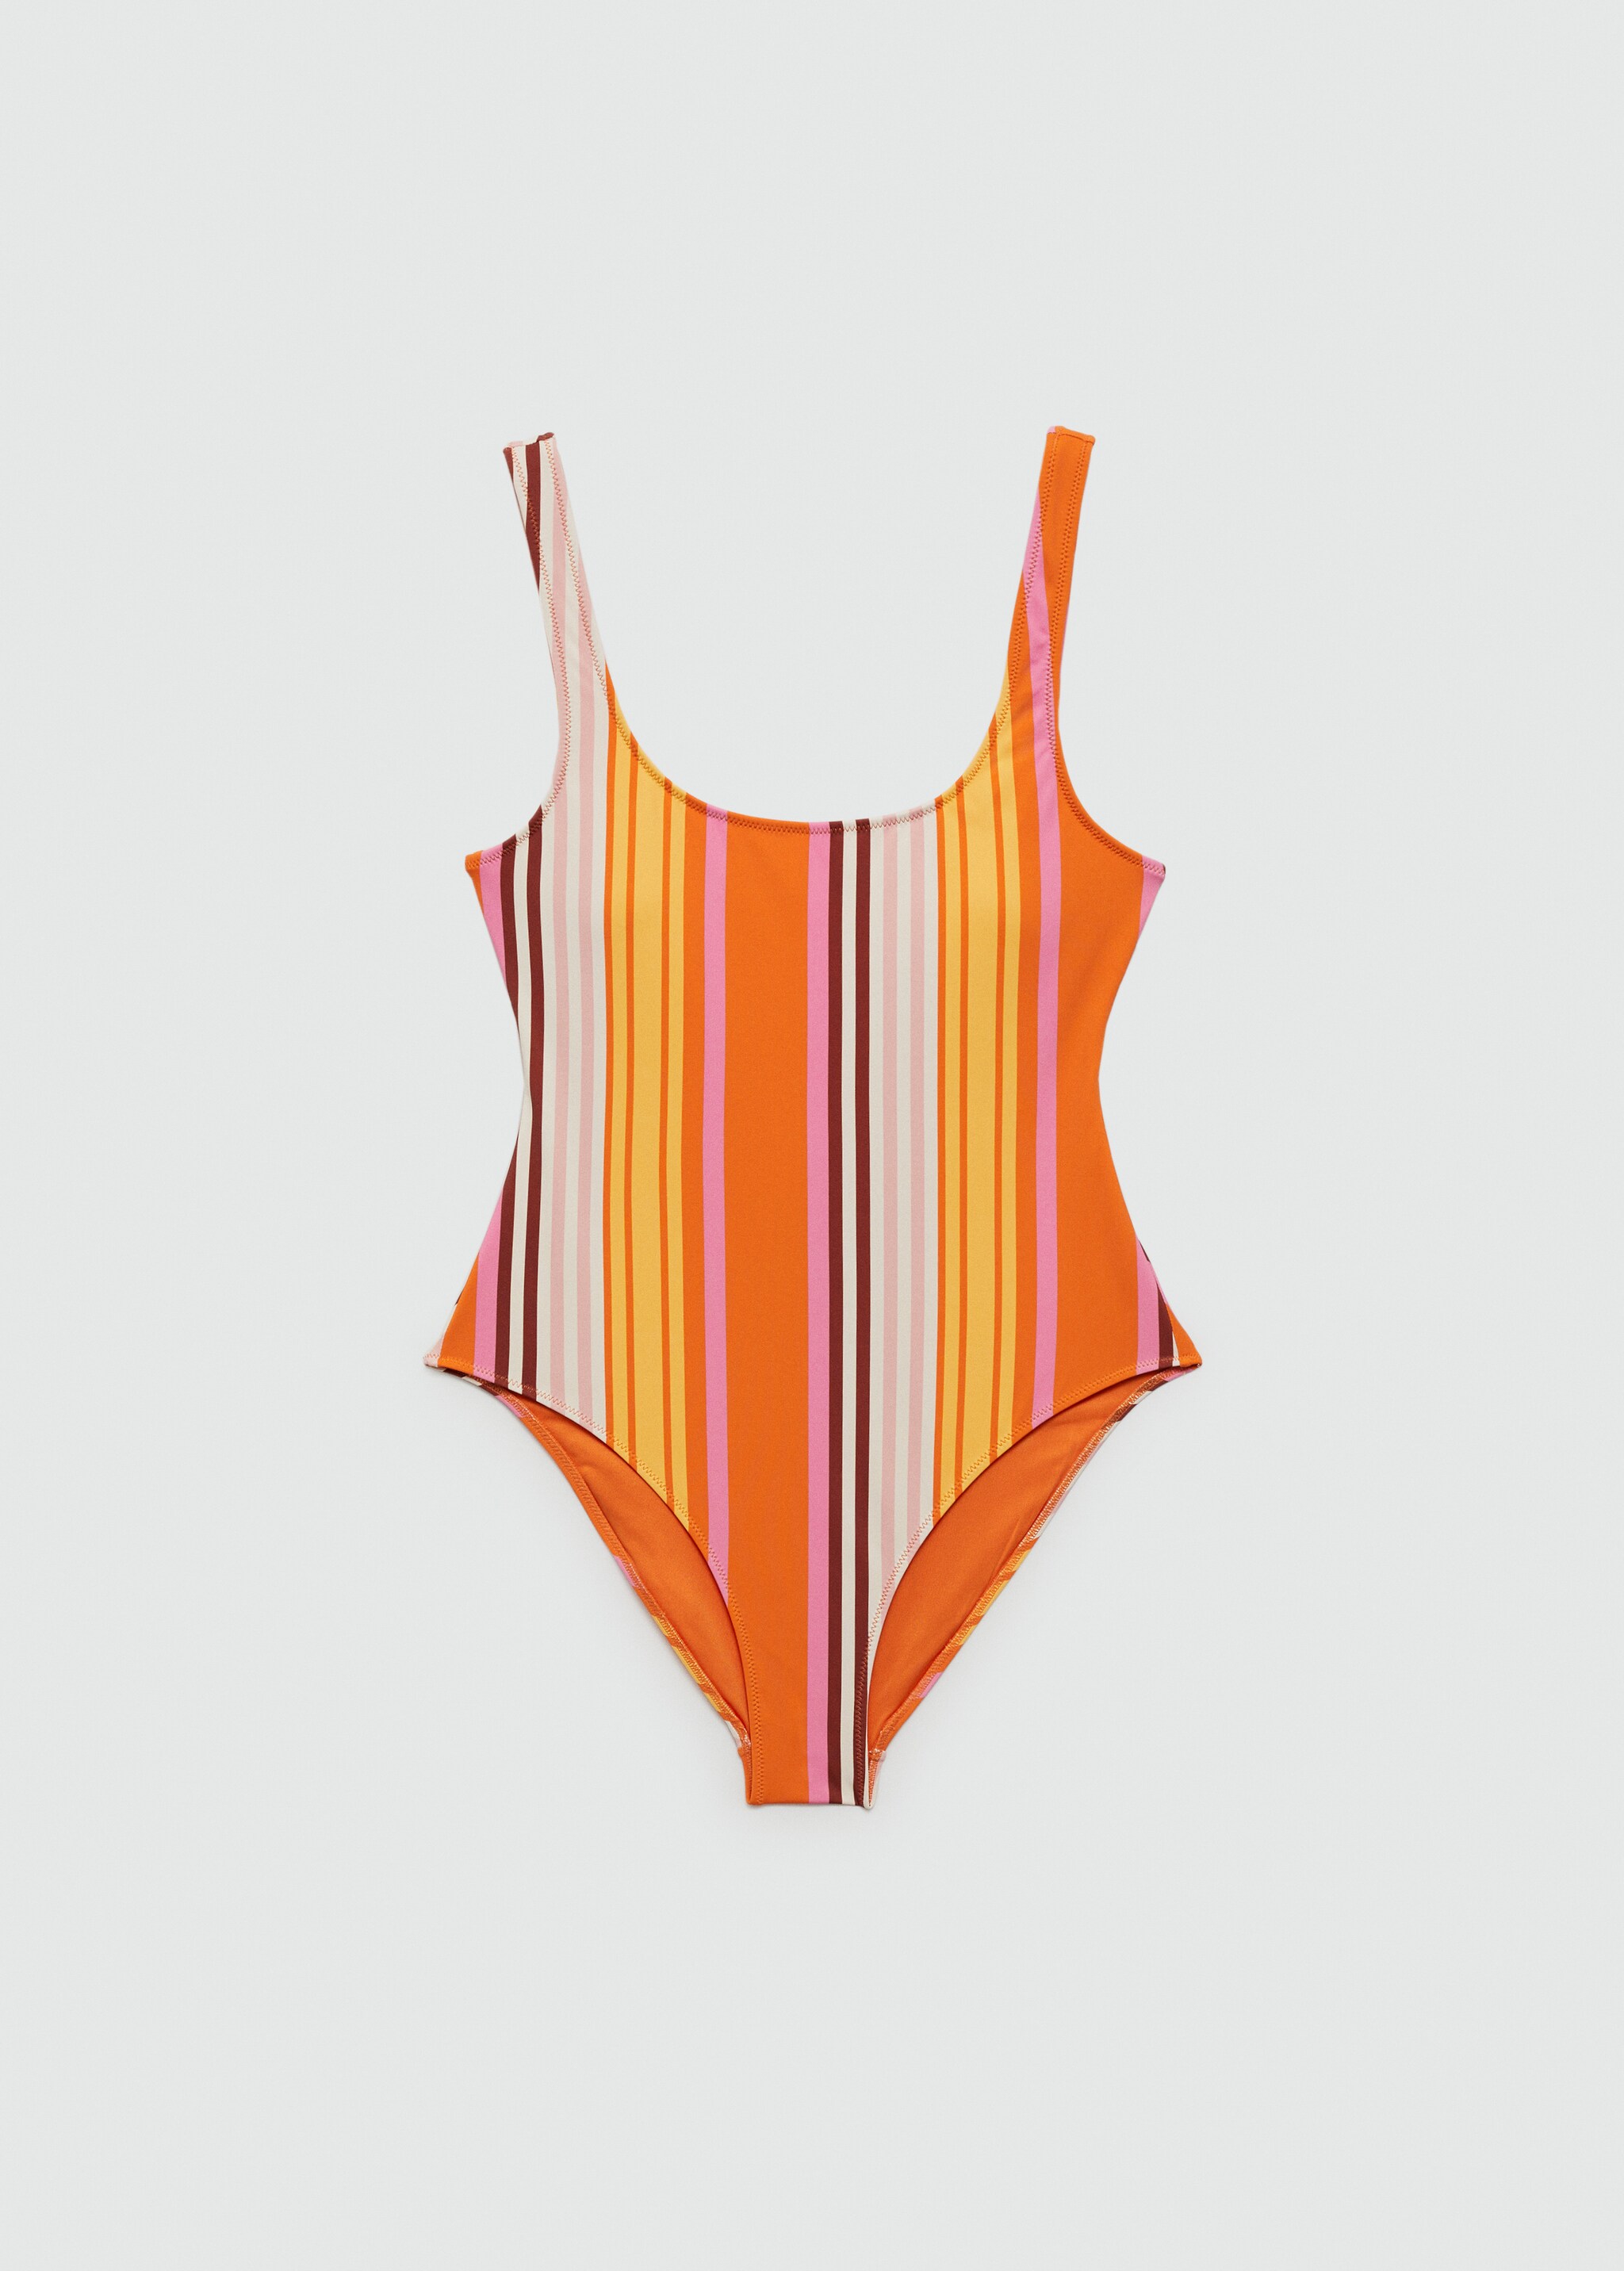 Stripes print swimsuit - Article without model